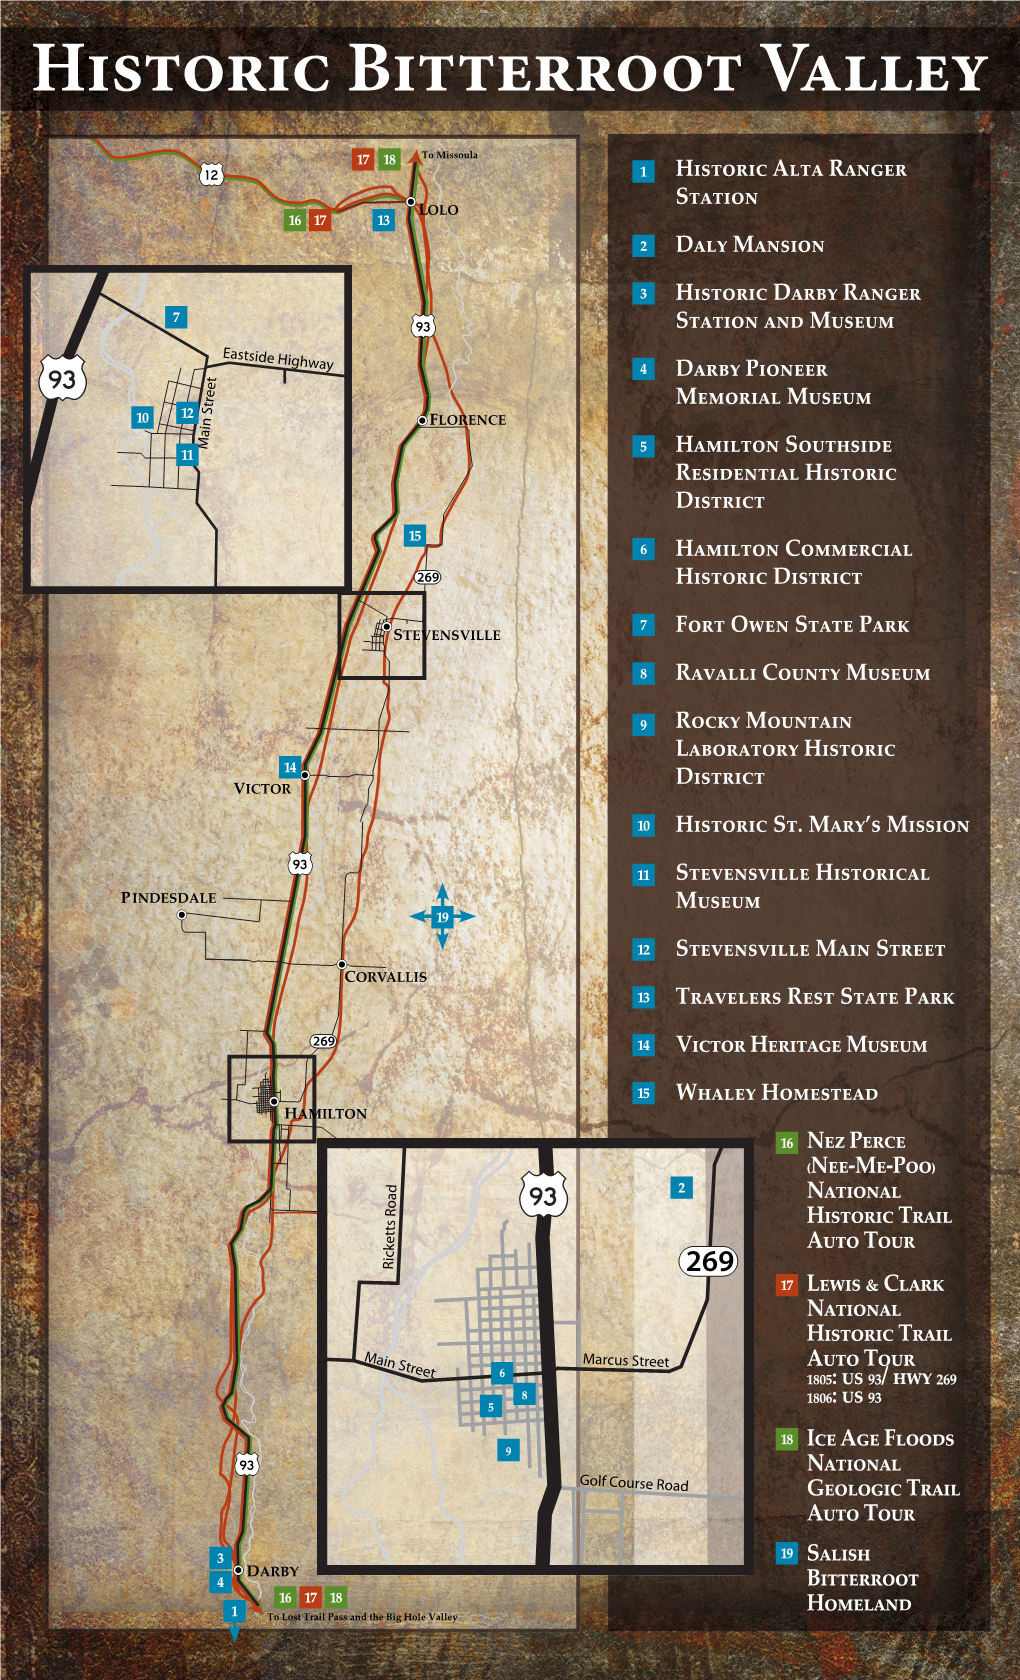 Historic Bitterroot Valley Map & Guide